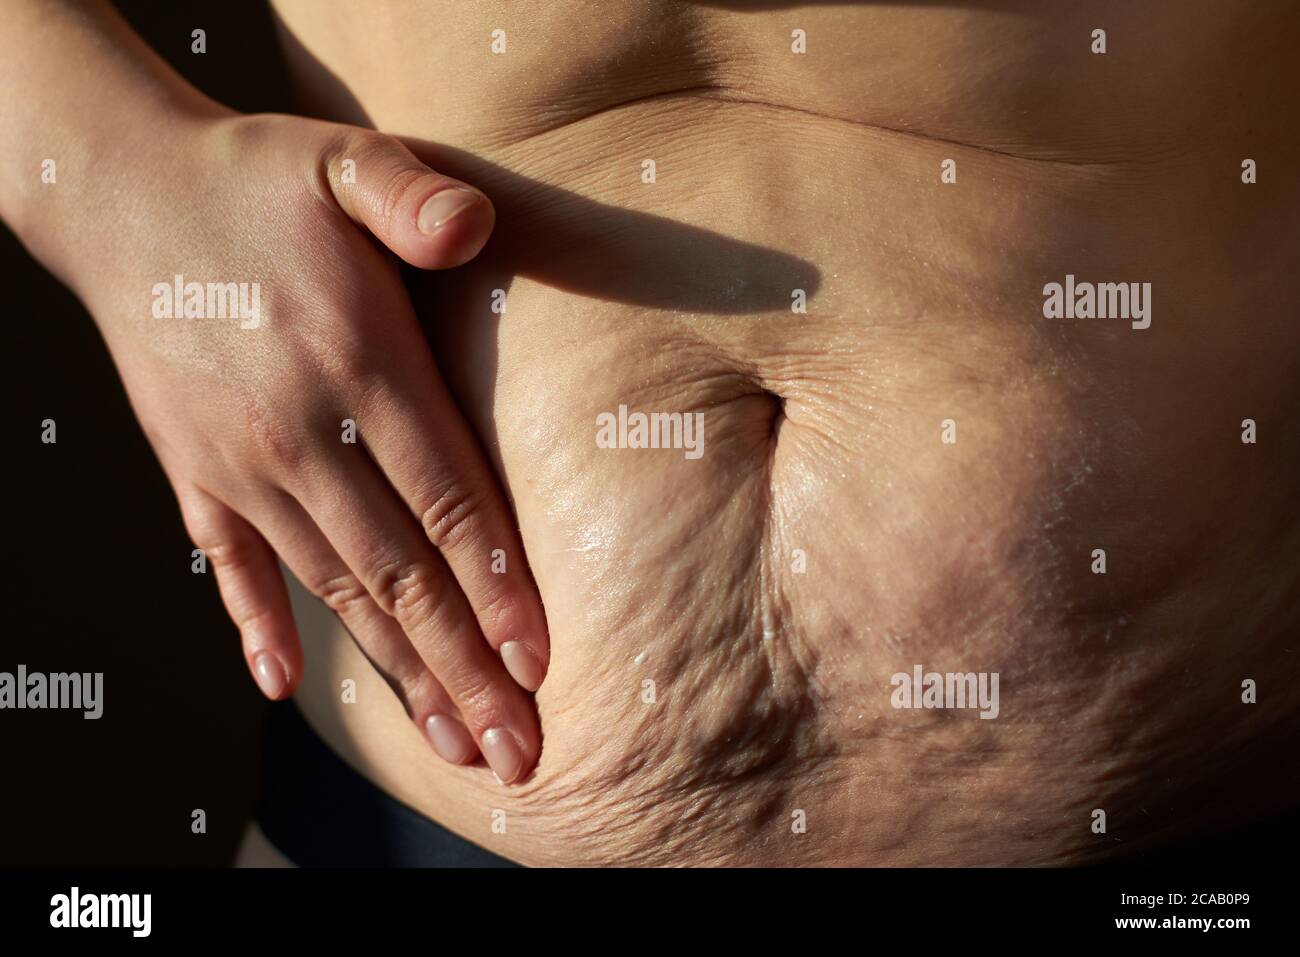 Woman smears nutritious cream sagging flabby belly with stretch marks, close-up. Stock Photo